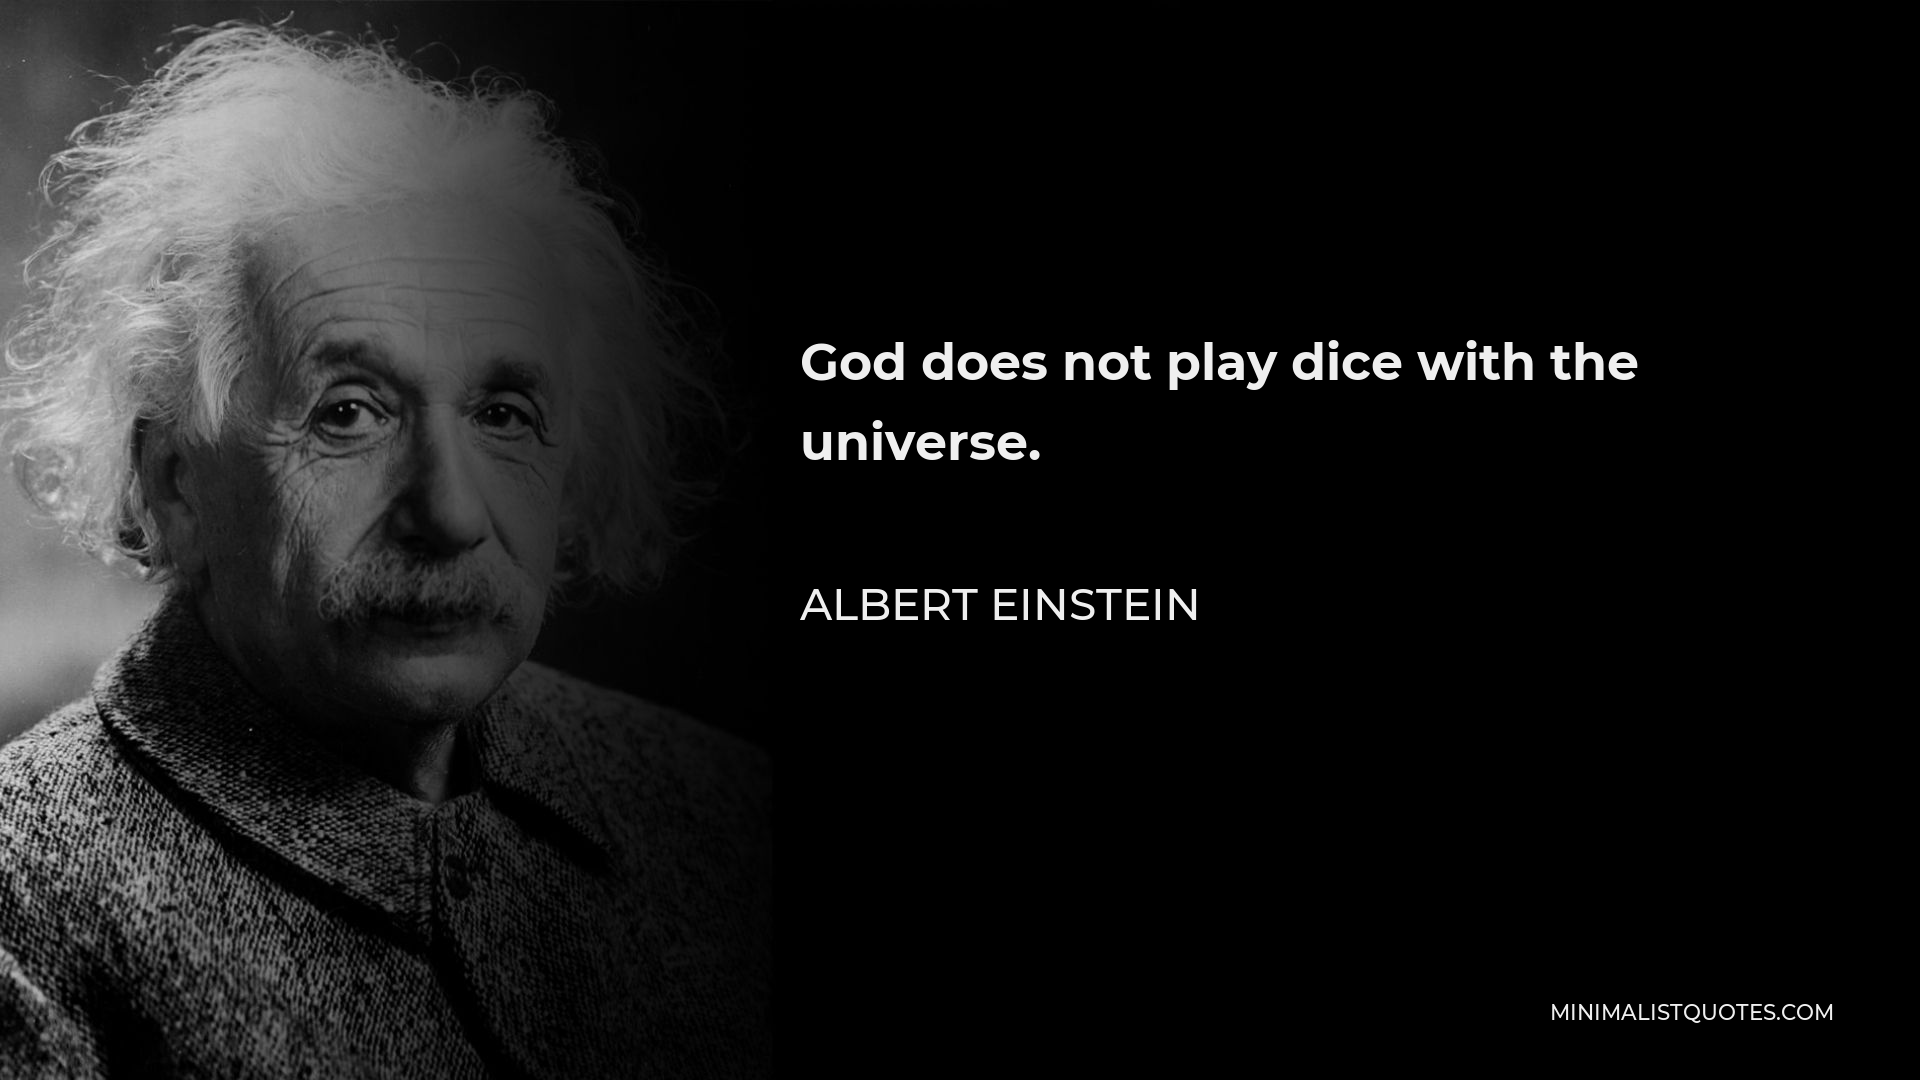 Albert Einstein Quote - God does not play dice with the universe.